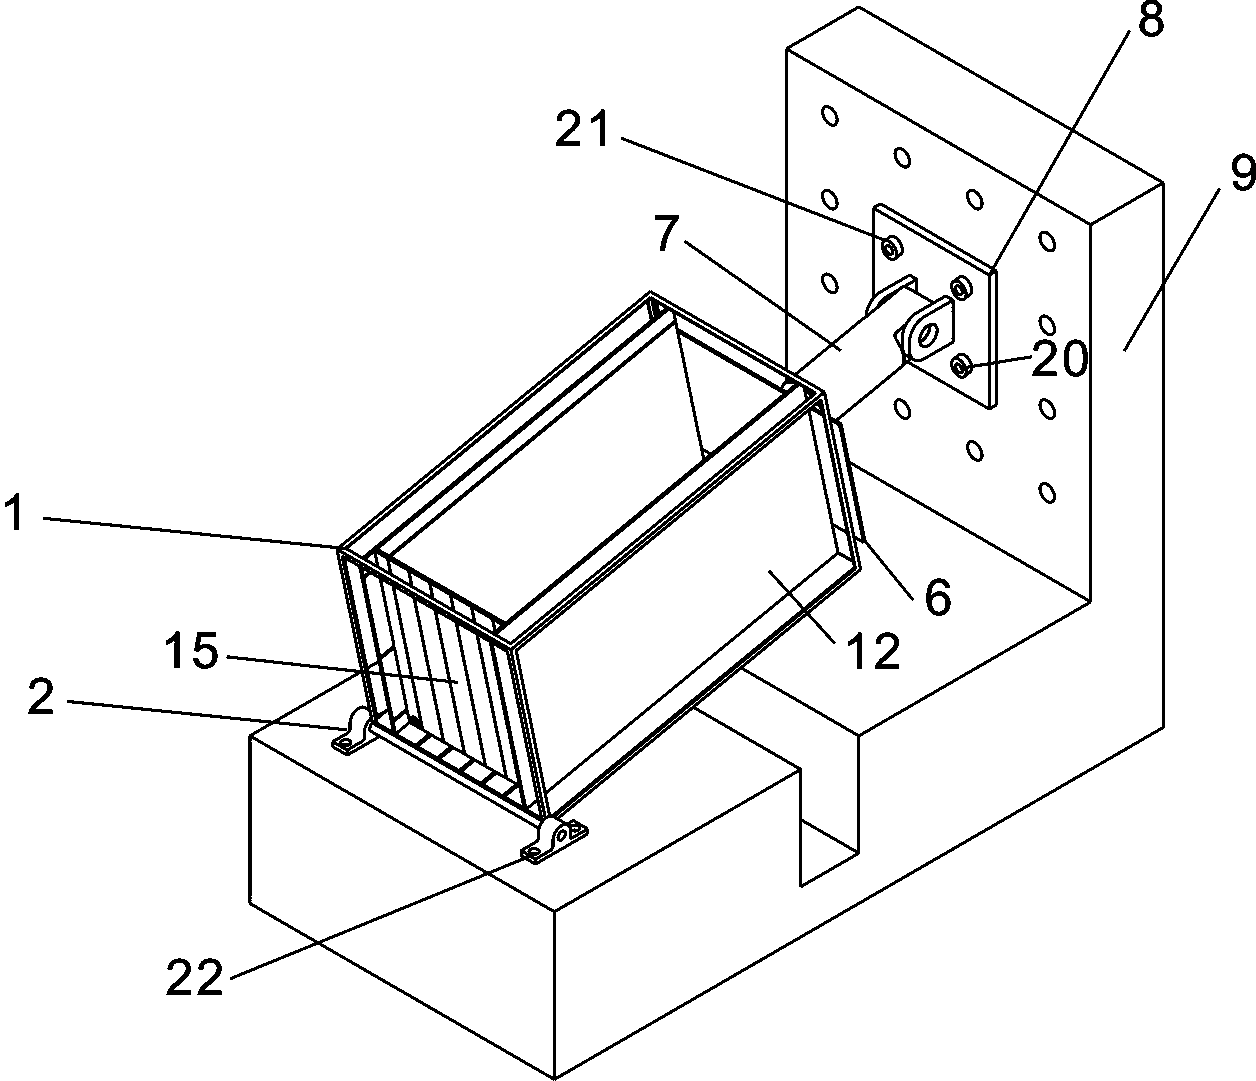 Large movable lateral uplifting composite lading slope physical model test apparatus